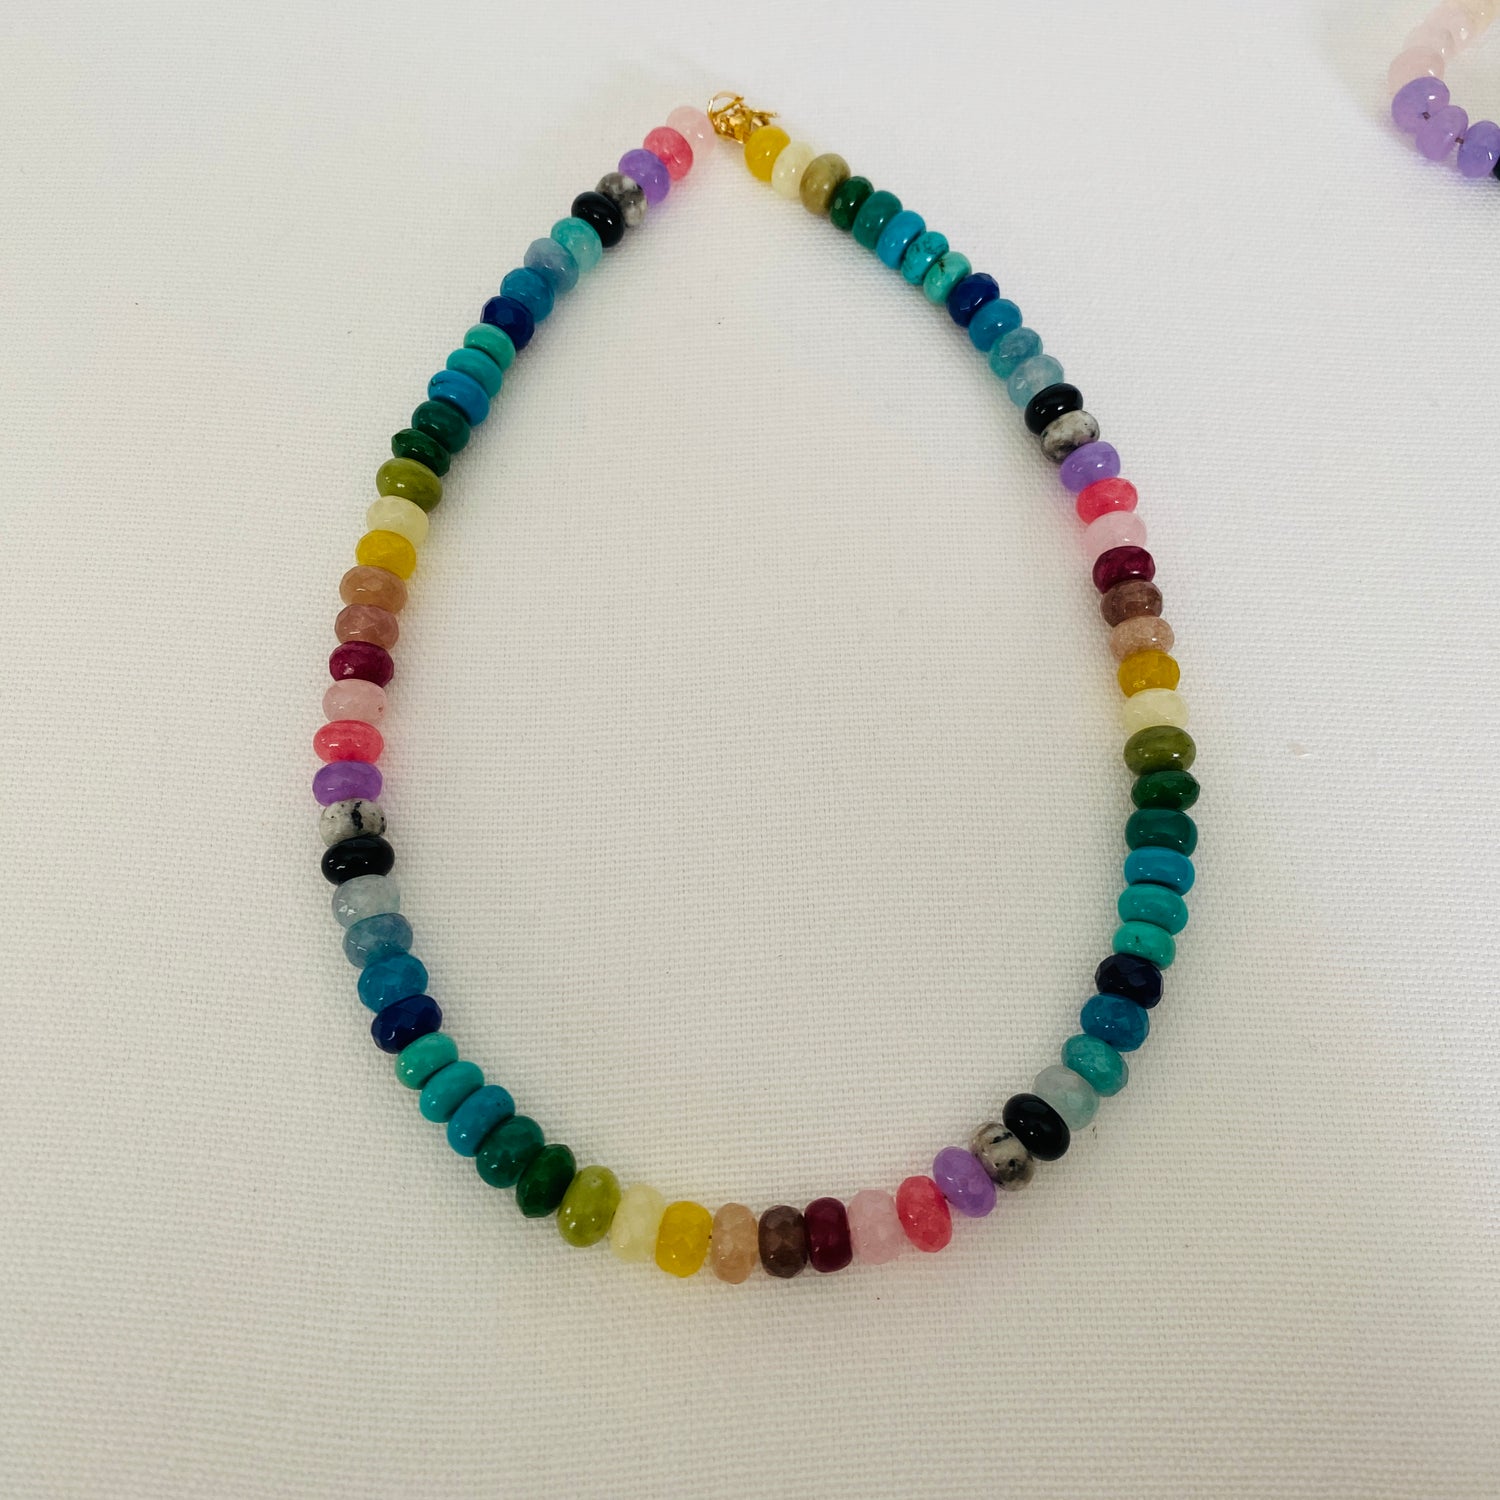 Candy Beads, Rainbow, Pony Beads, Forte Beads, Colorful Necklace, Beaded, Rondel Beads